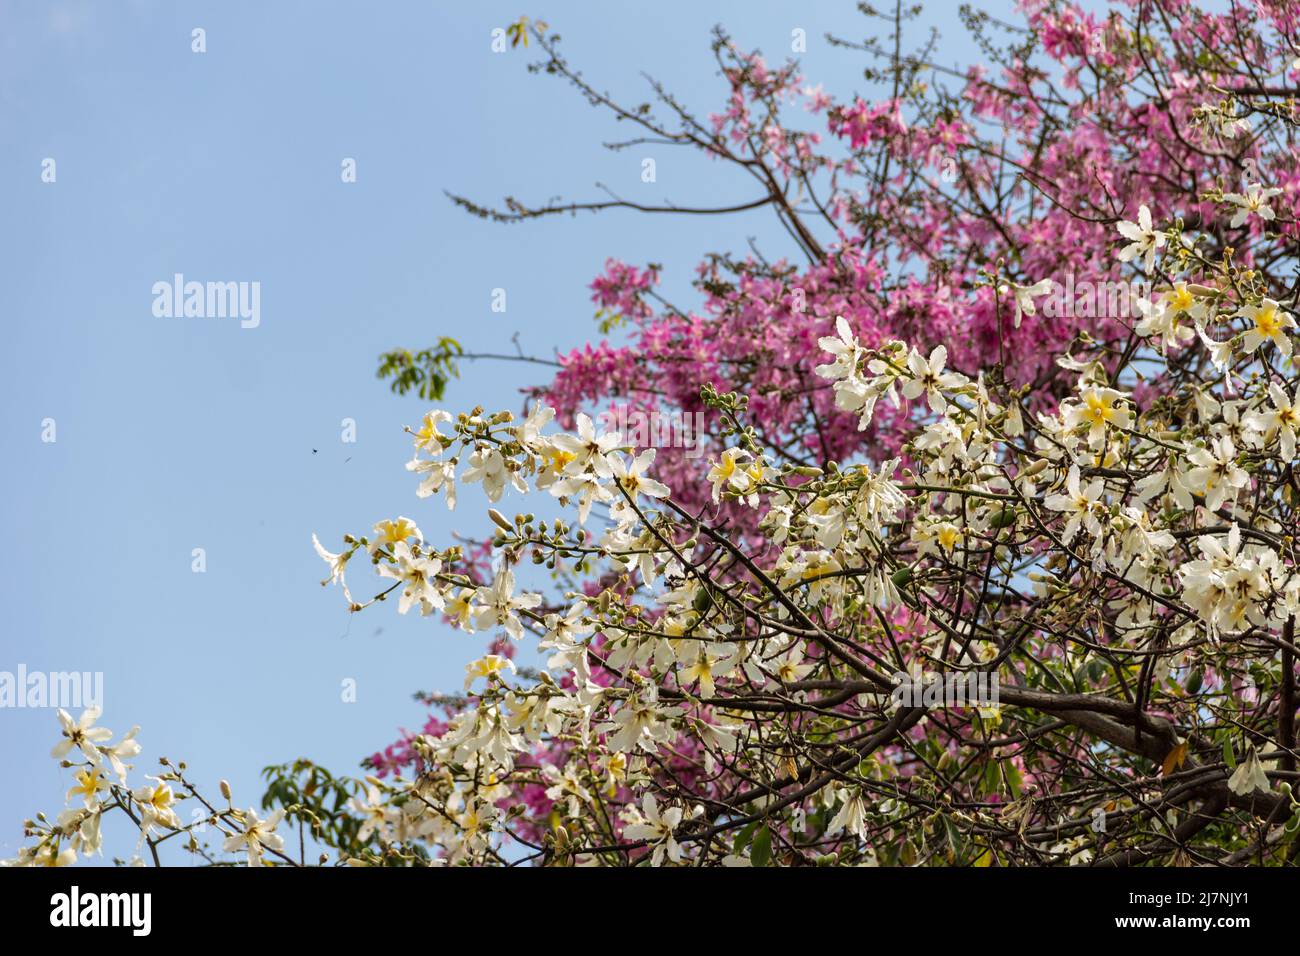 Goiânia, Goias, Brazil – May 04, 2022: Detail of branches of two different trees, full of pink and white flowers. Commonly known as 'bellies'. Stock Photo